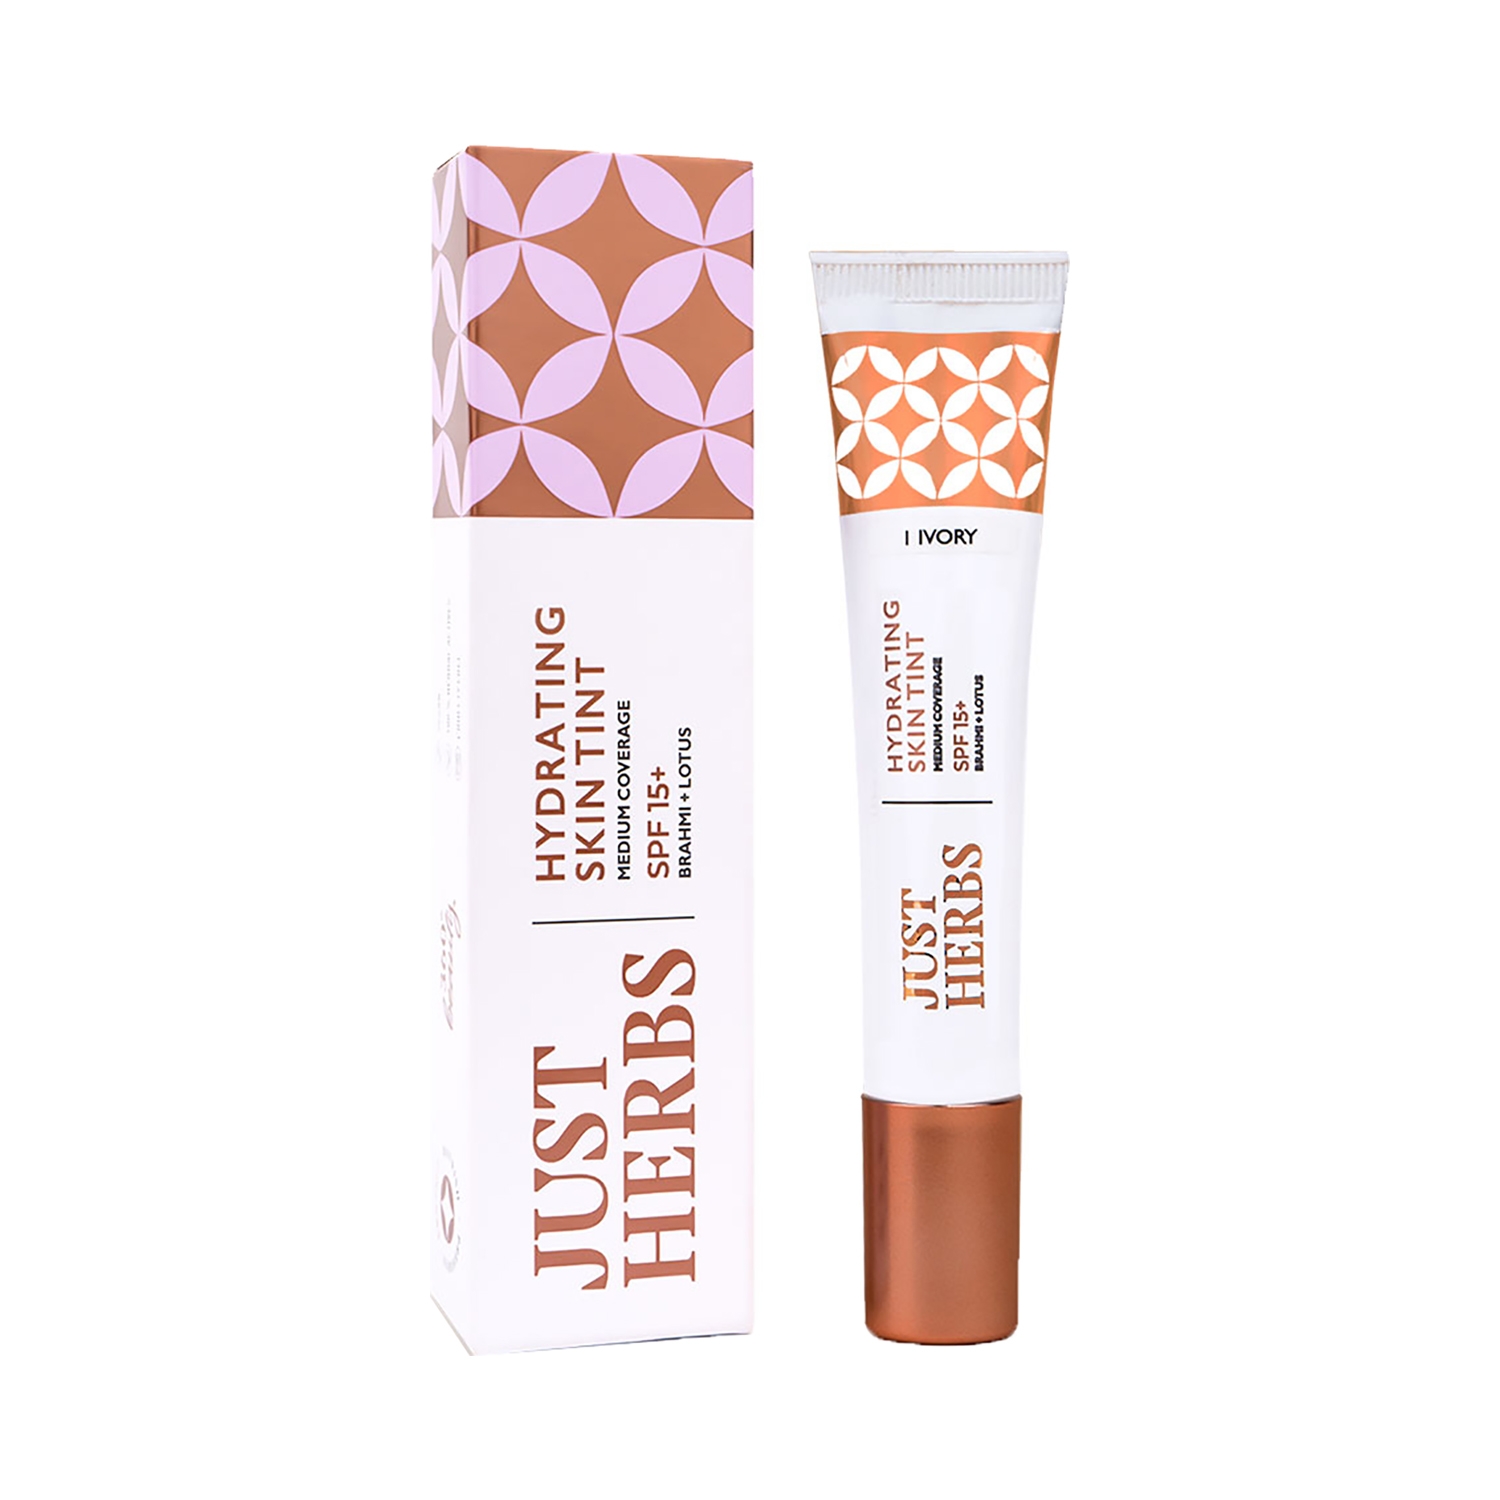 Just Herbs | Just Herbs Enriched Hydrating Skin Tint SPF 15+ - 01 Ivory (20g)